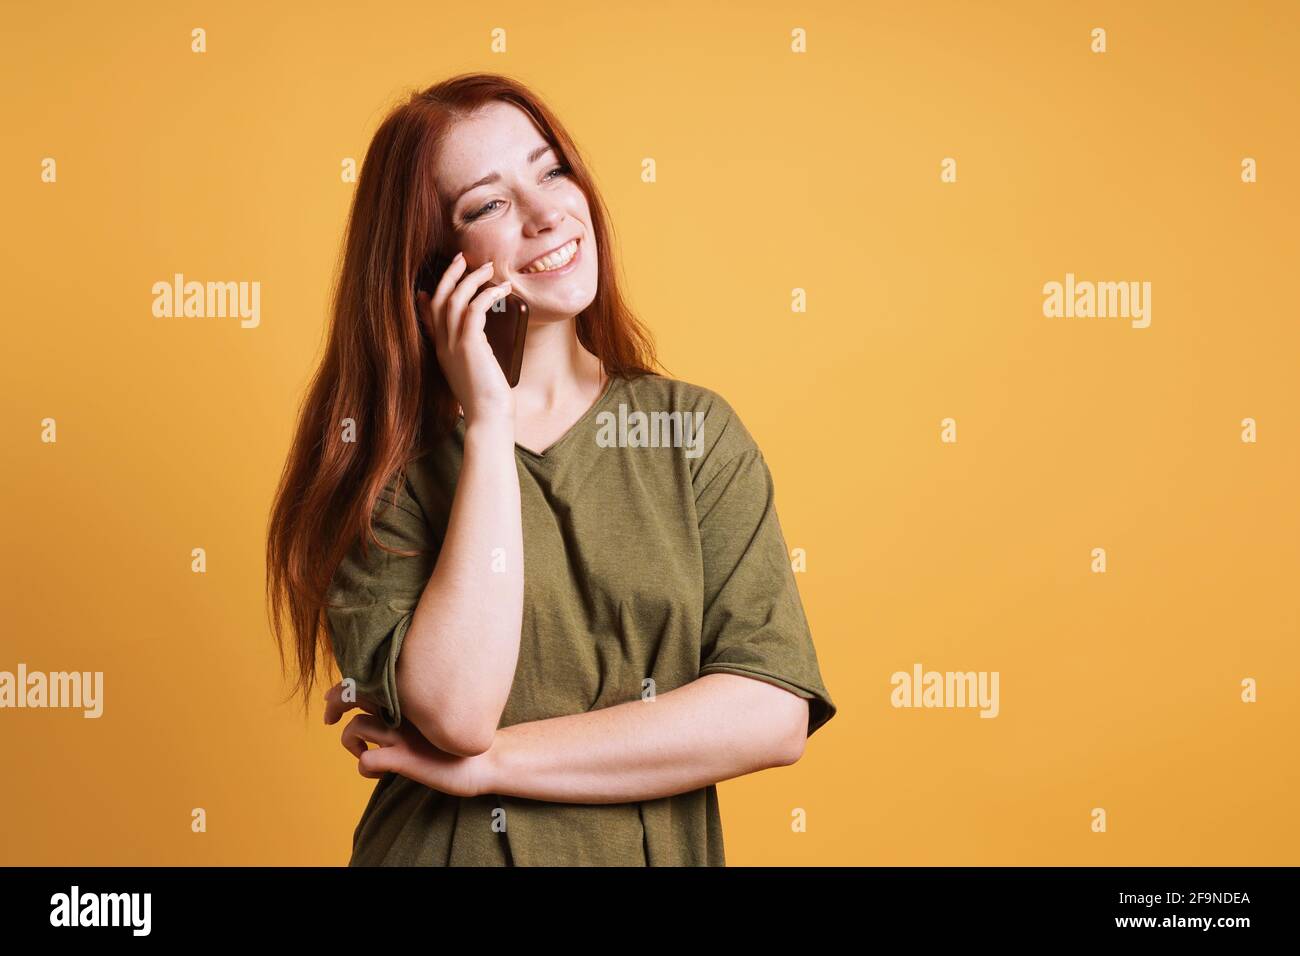 happy laughing young woman talking on smartphone or mobile cell phone Stock Photo